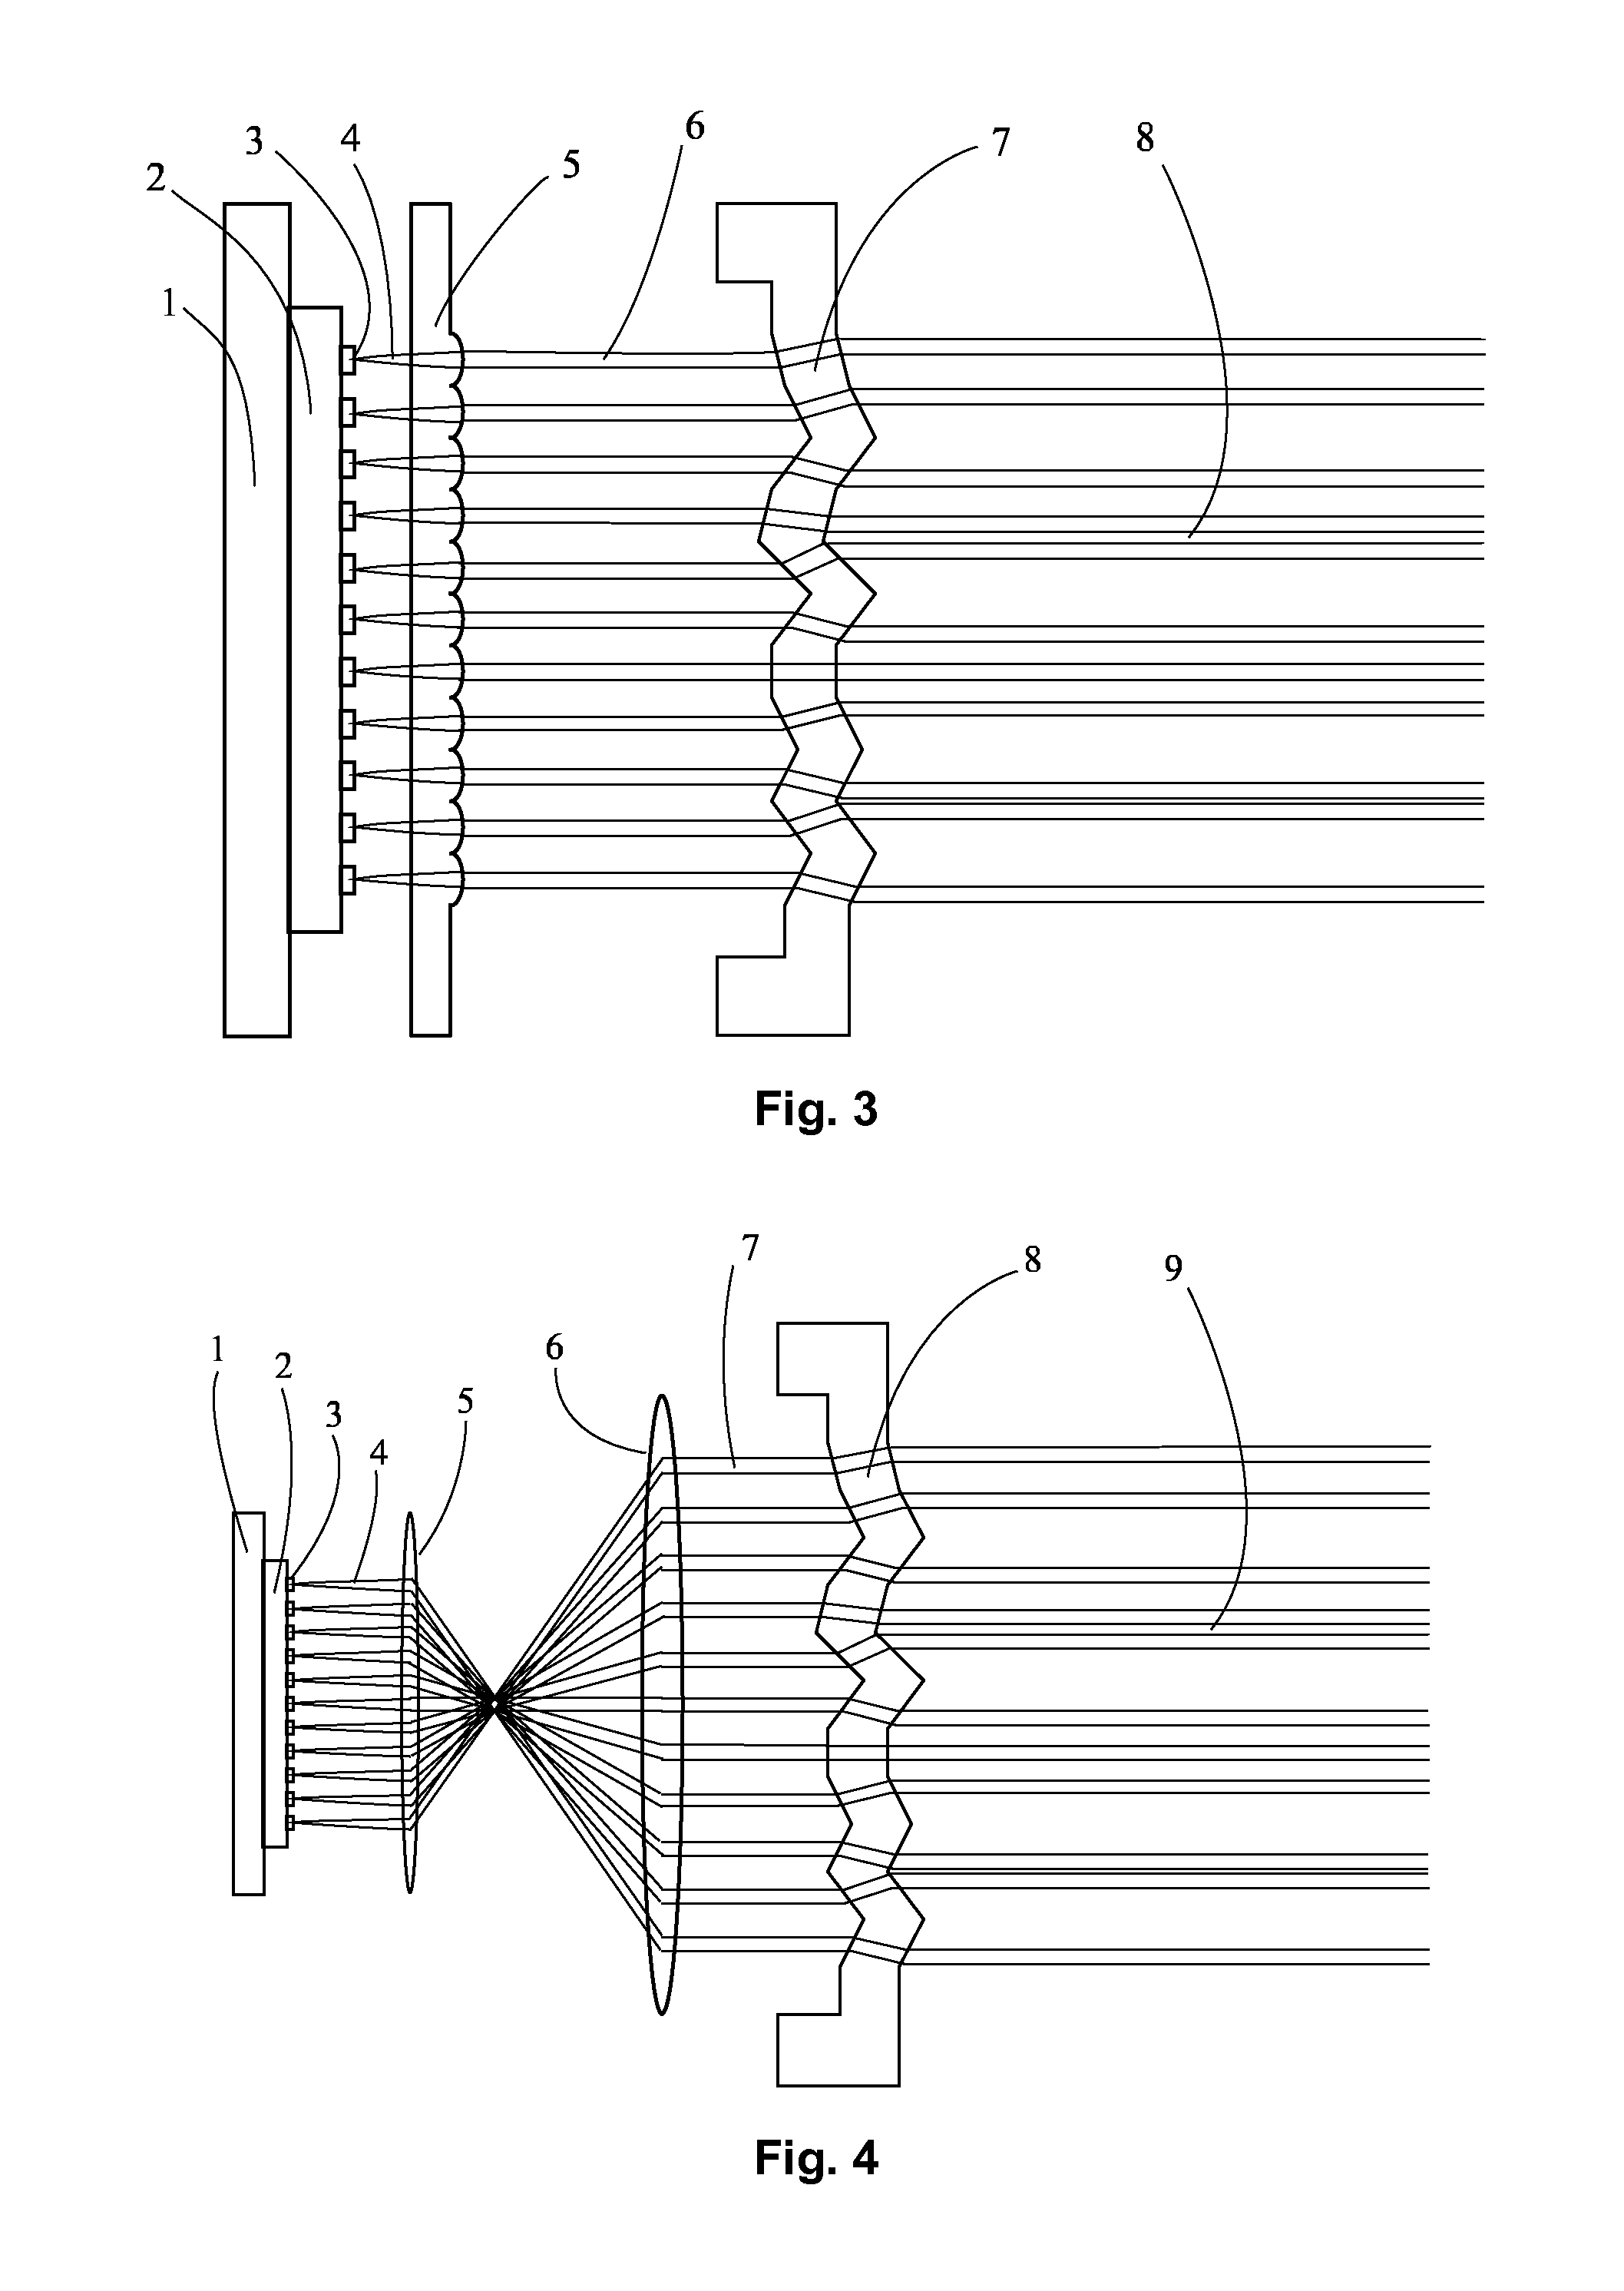 Optical system generating a structured light field from an array of light sources by means of a refracting or reflecting light structuring element